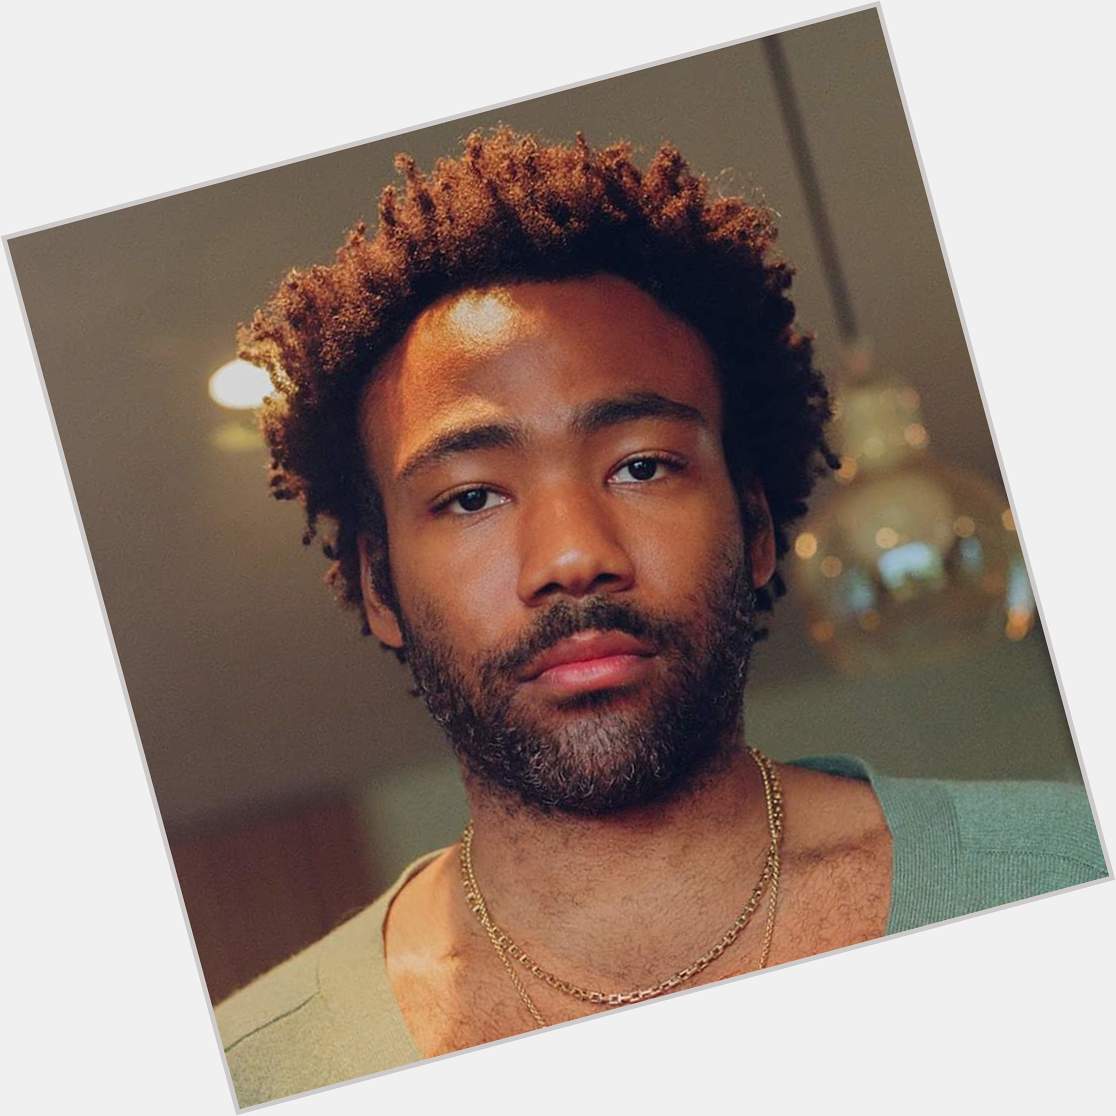 Donald Glover - September 25, 1983
HAPPY BIRTHDAY
actor, rapper, singer, writer, comedian, director, and producer. 